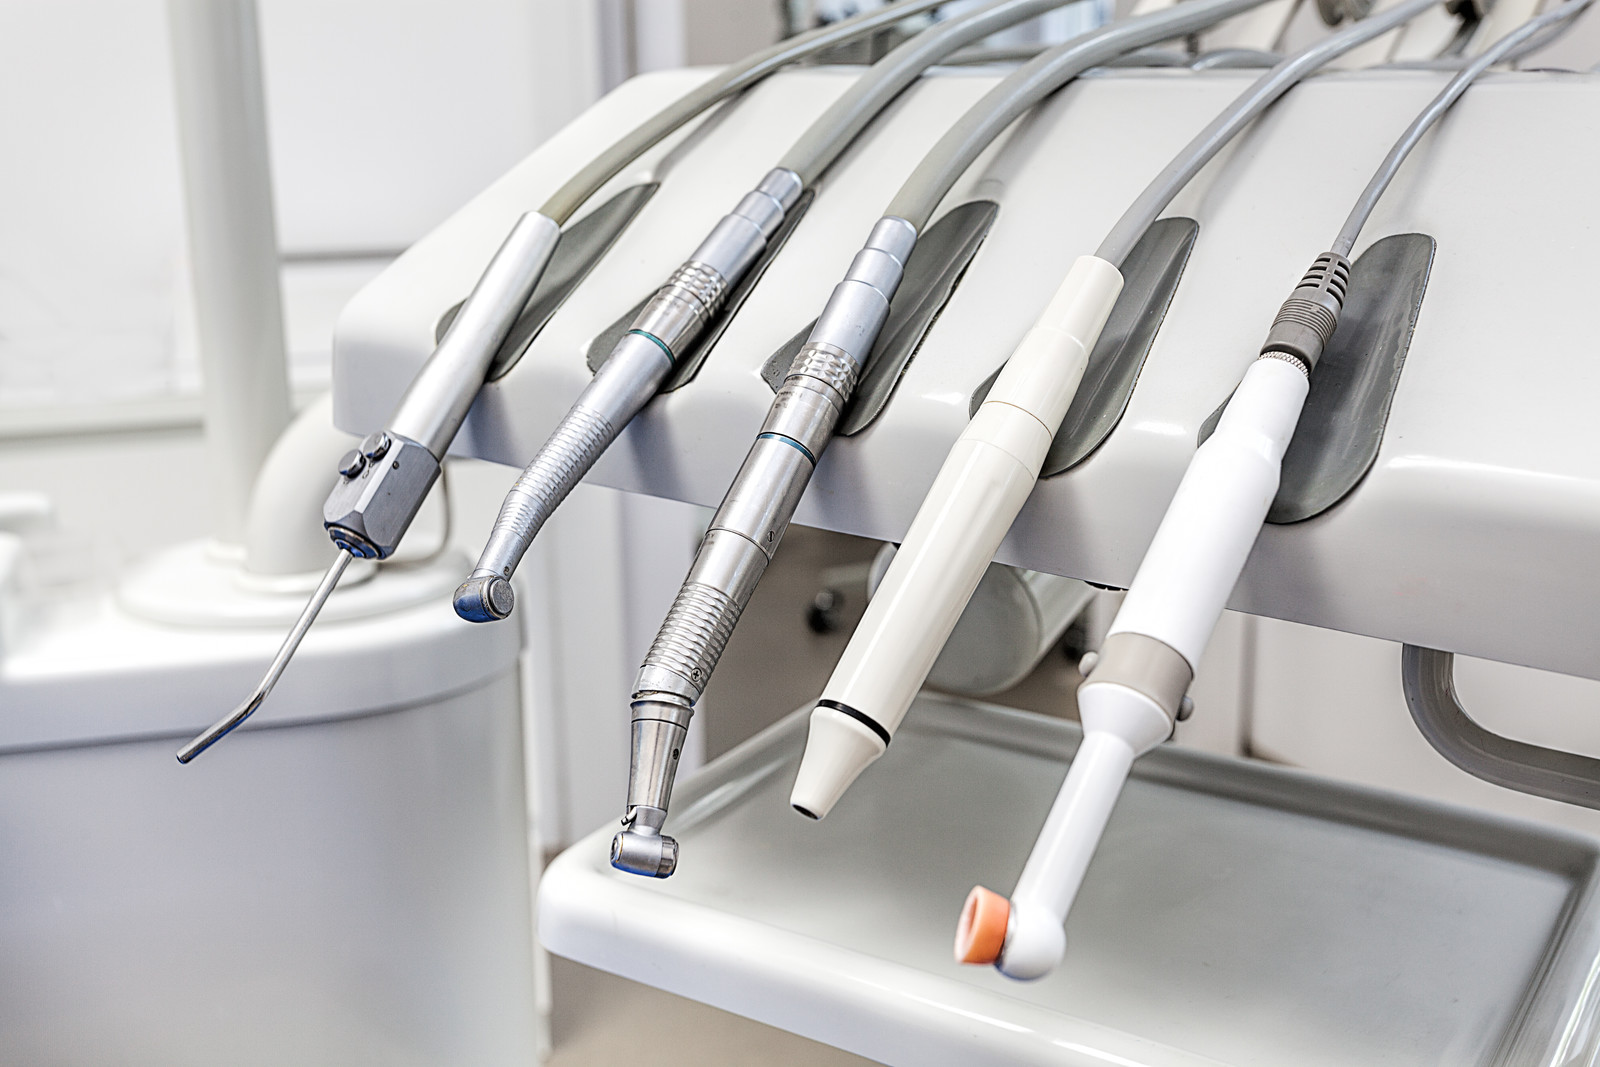 What are the Different Dental Tools Used by the Dentist?